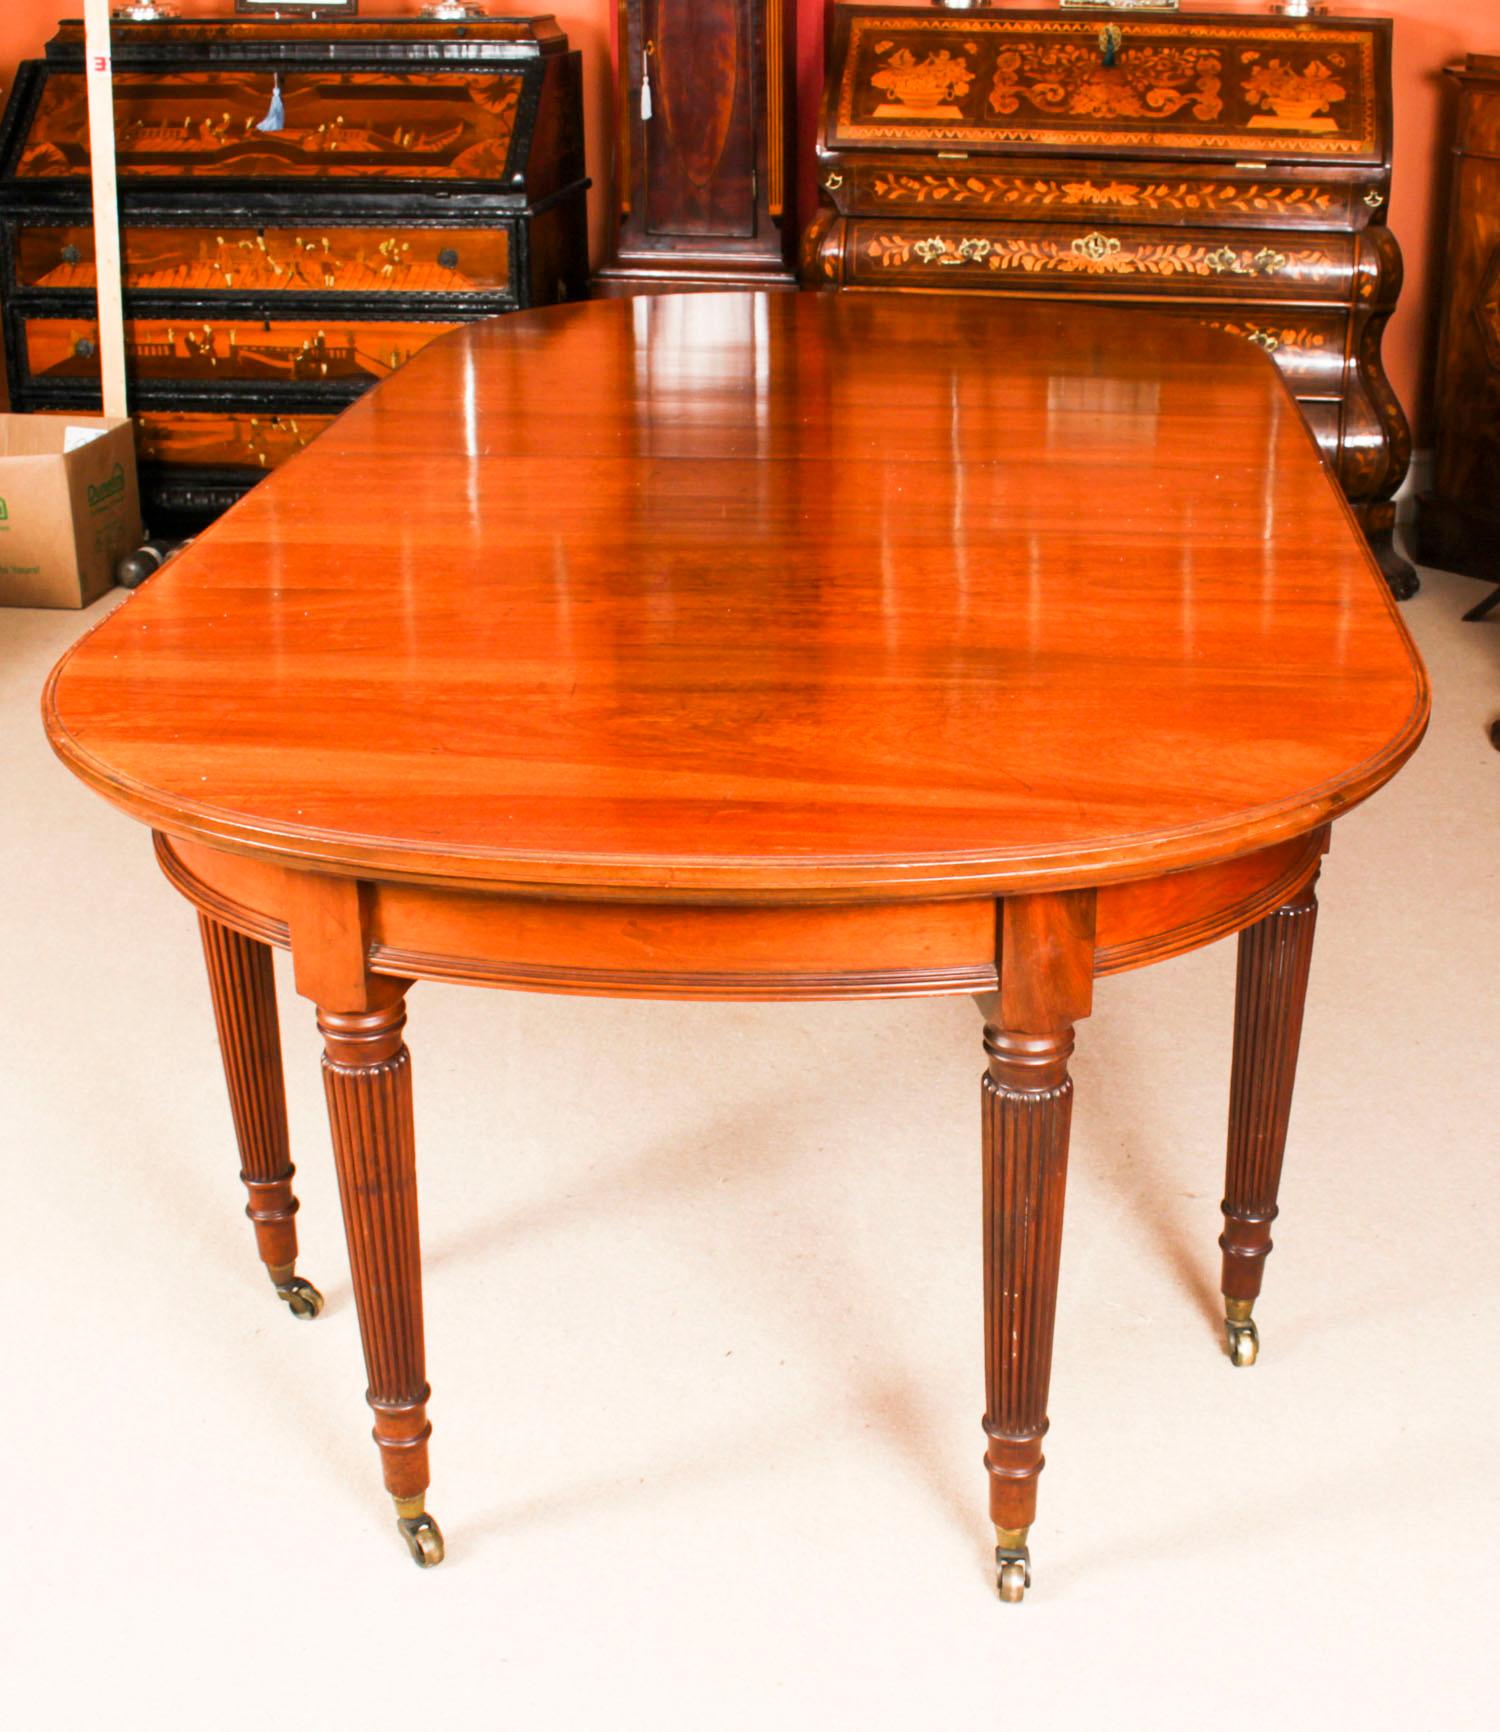 This is a fabulous antique Victorian oval flame mahogany extending dining table, circa 1880 in date. 

The table has two original leaves and has been hand-crafted from solid flame mahogany which has a beautiful grain and colour.

The two leaves